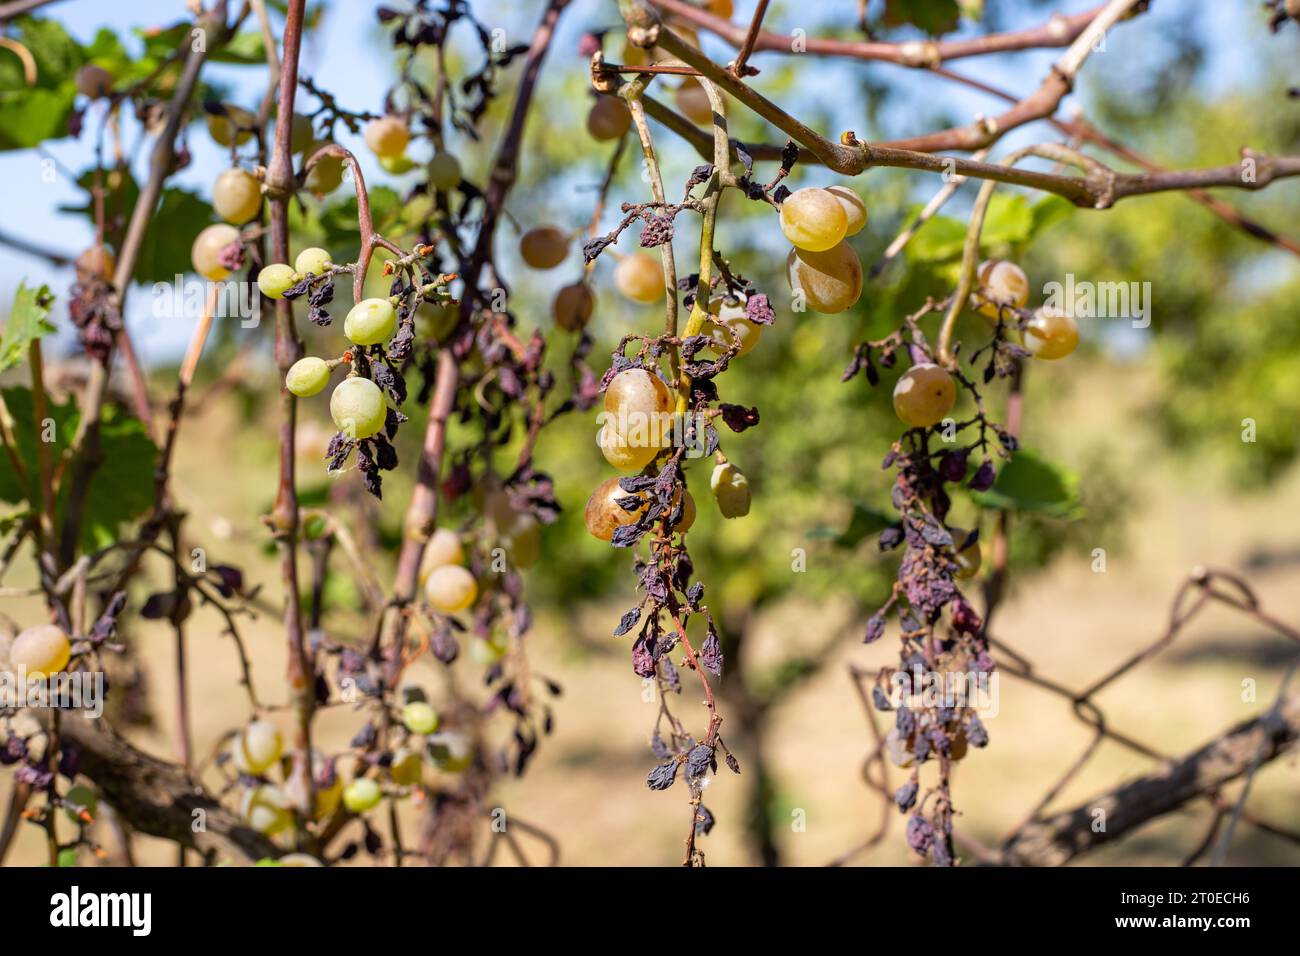 sick dried grapes. Bunches of green grapes with dried fruits on the vine. Stock Photo